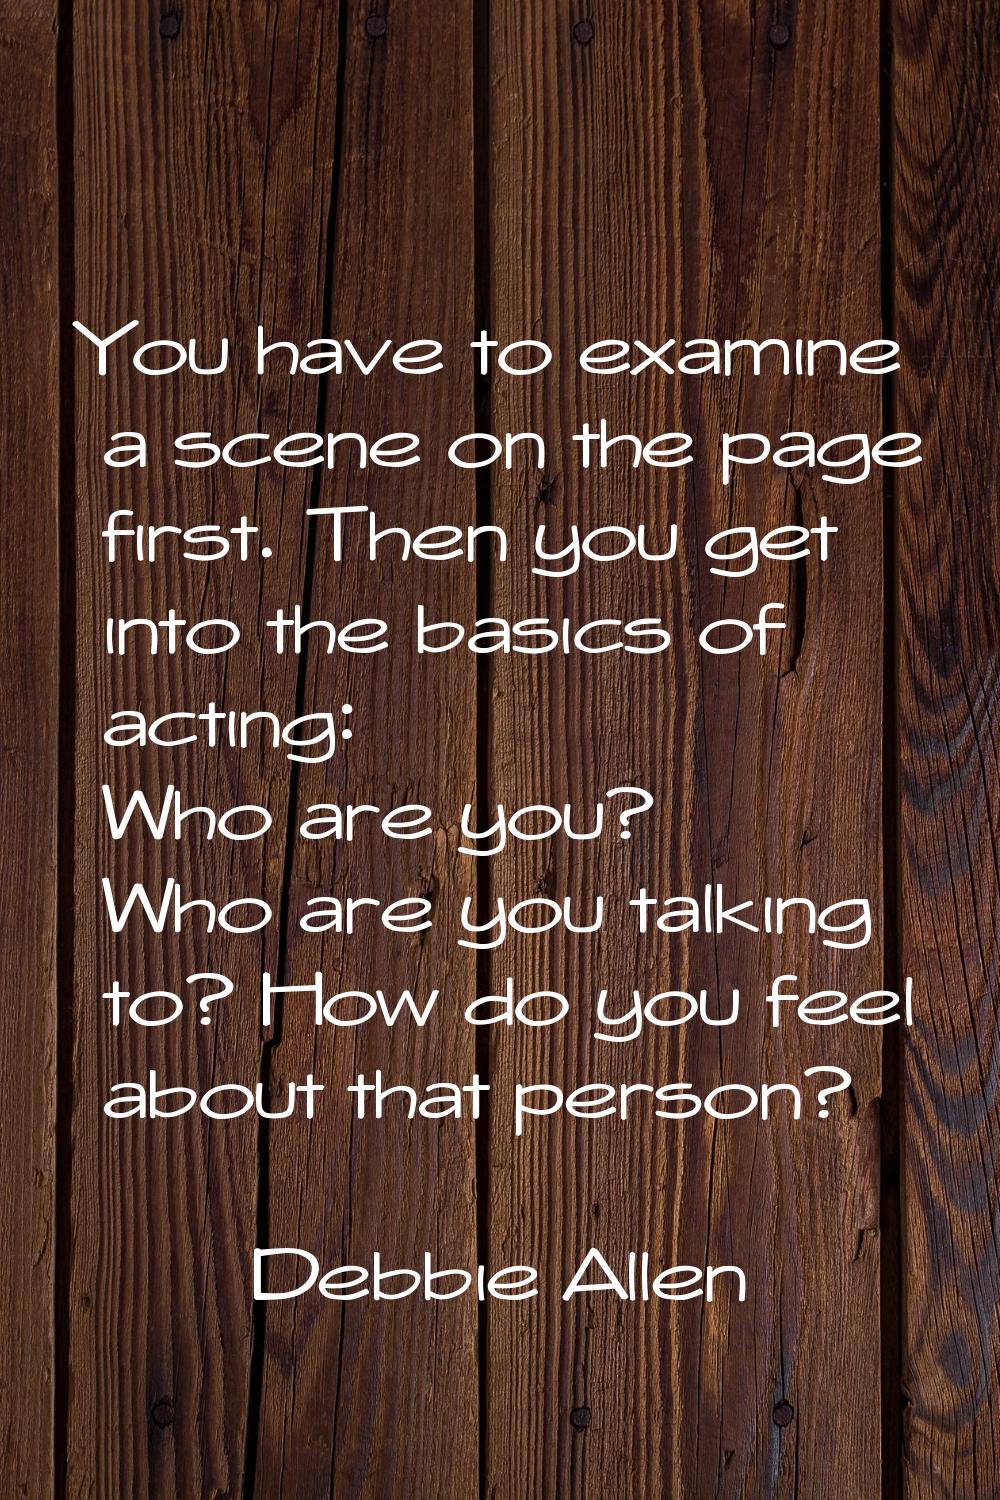 You have to examine a scene on the page first. Then you get into the basics of acting: Who are you?